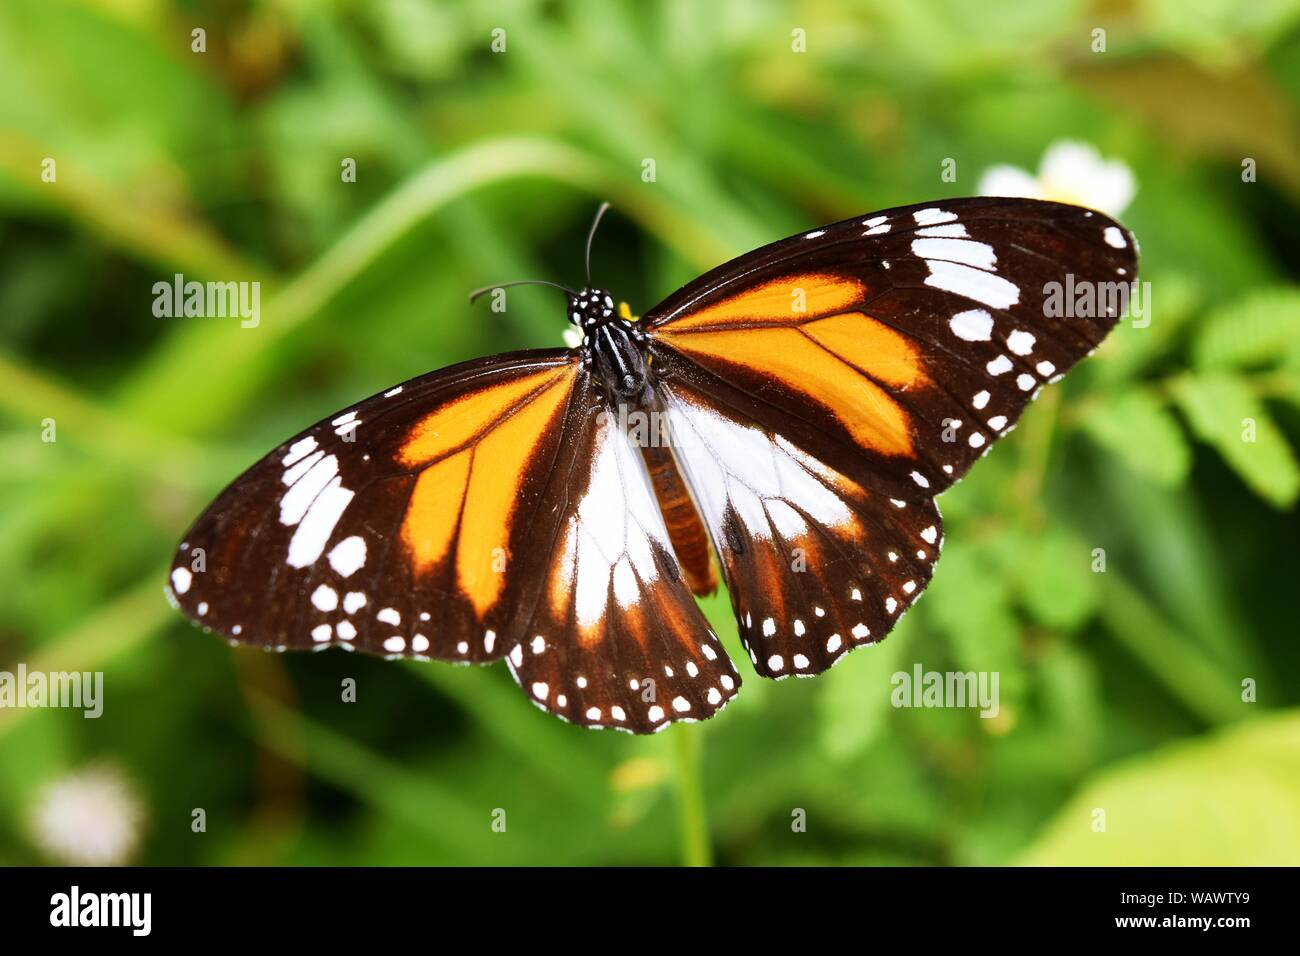 Black Veined Tiger, Danaus melanippus, Patterned orange white and black color on the spreading wing,The butterfly seeking nectar on flower Stock Photo